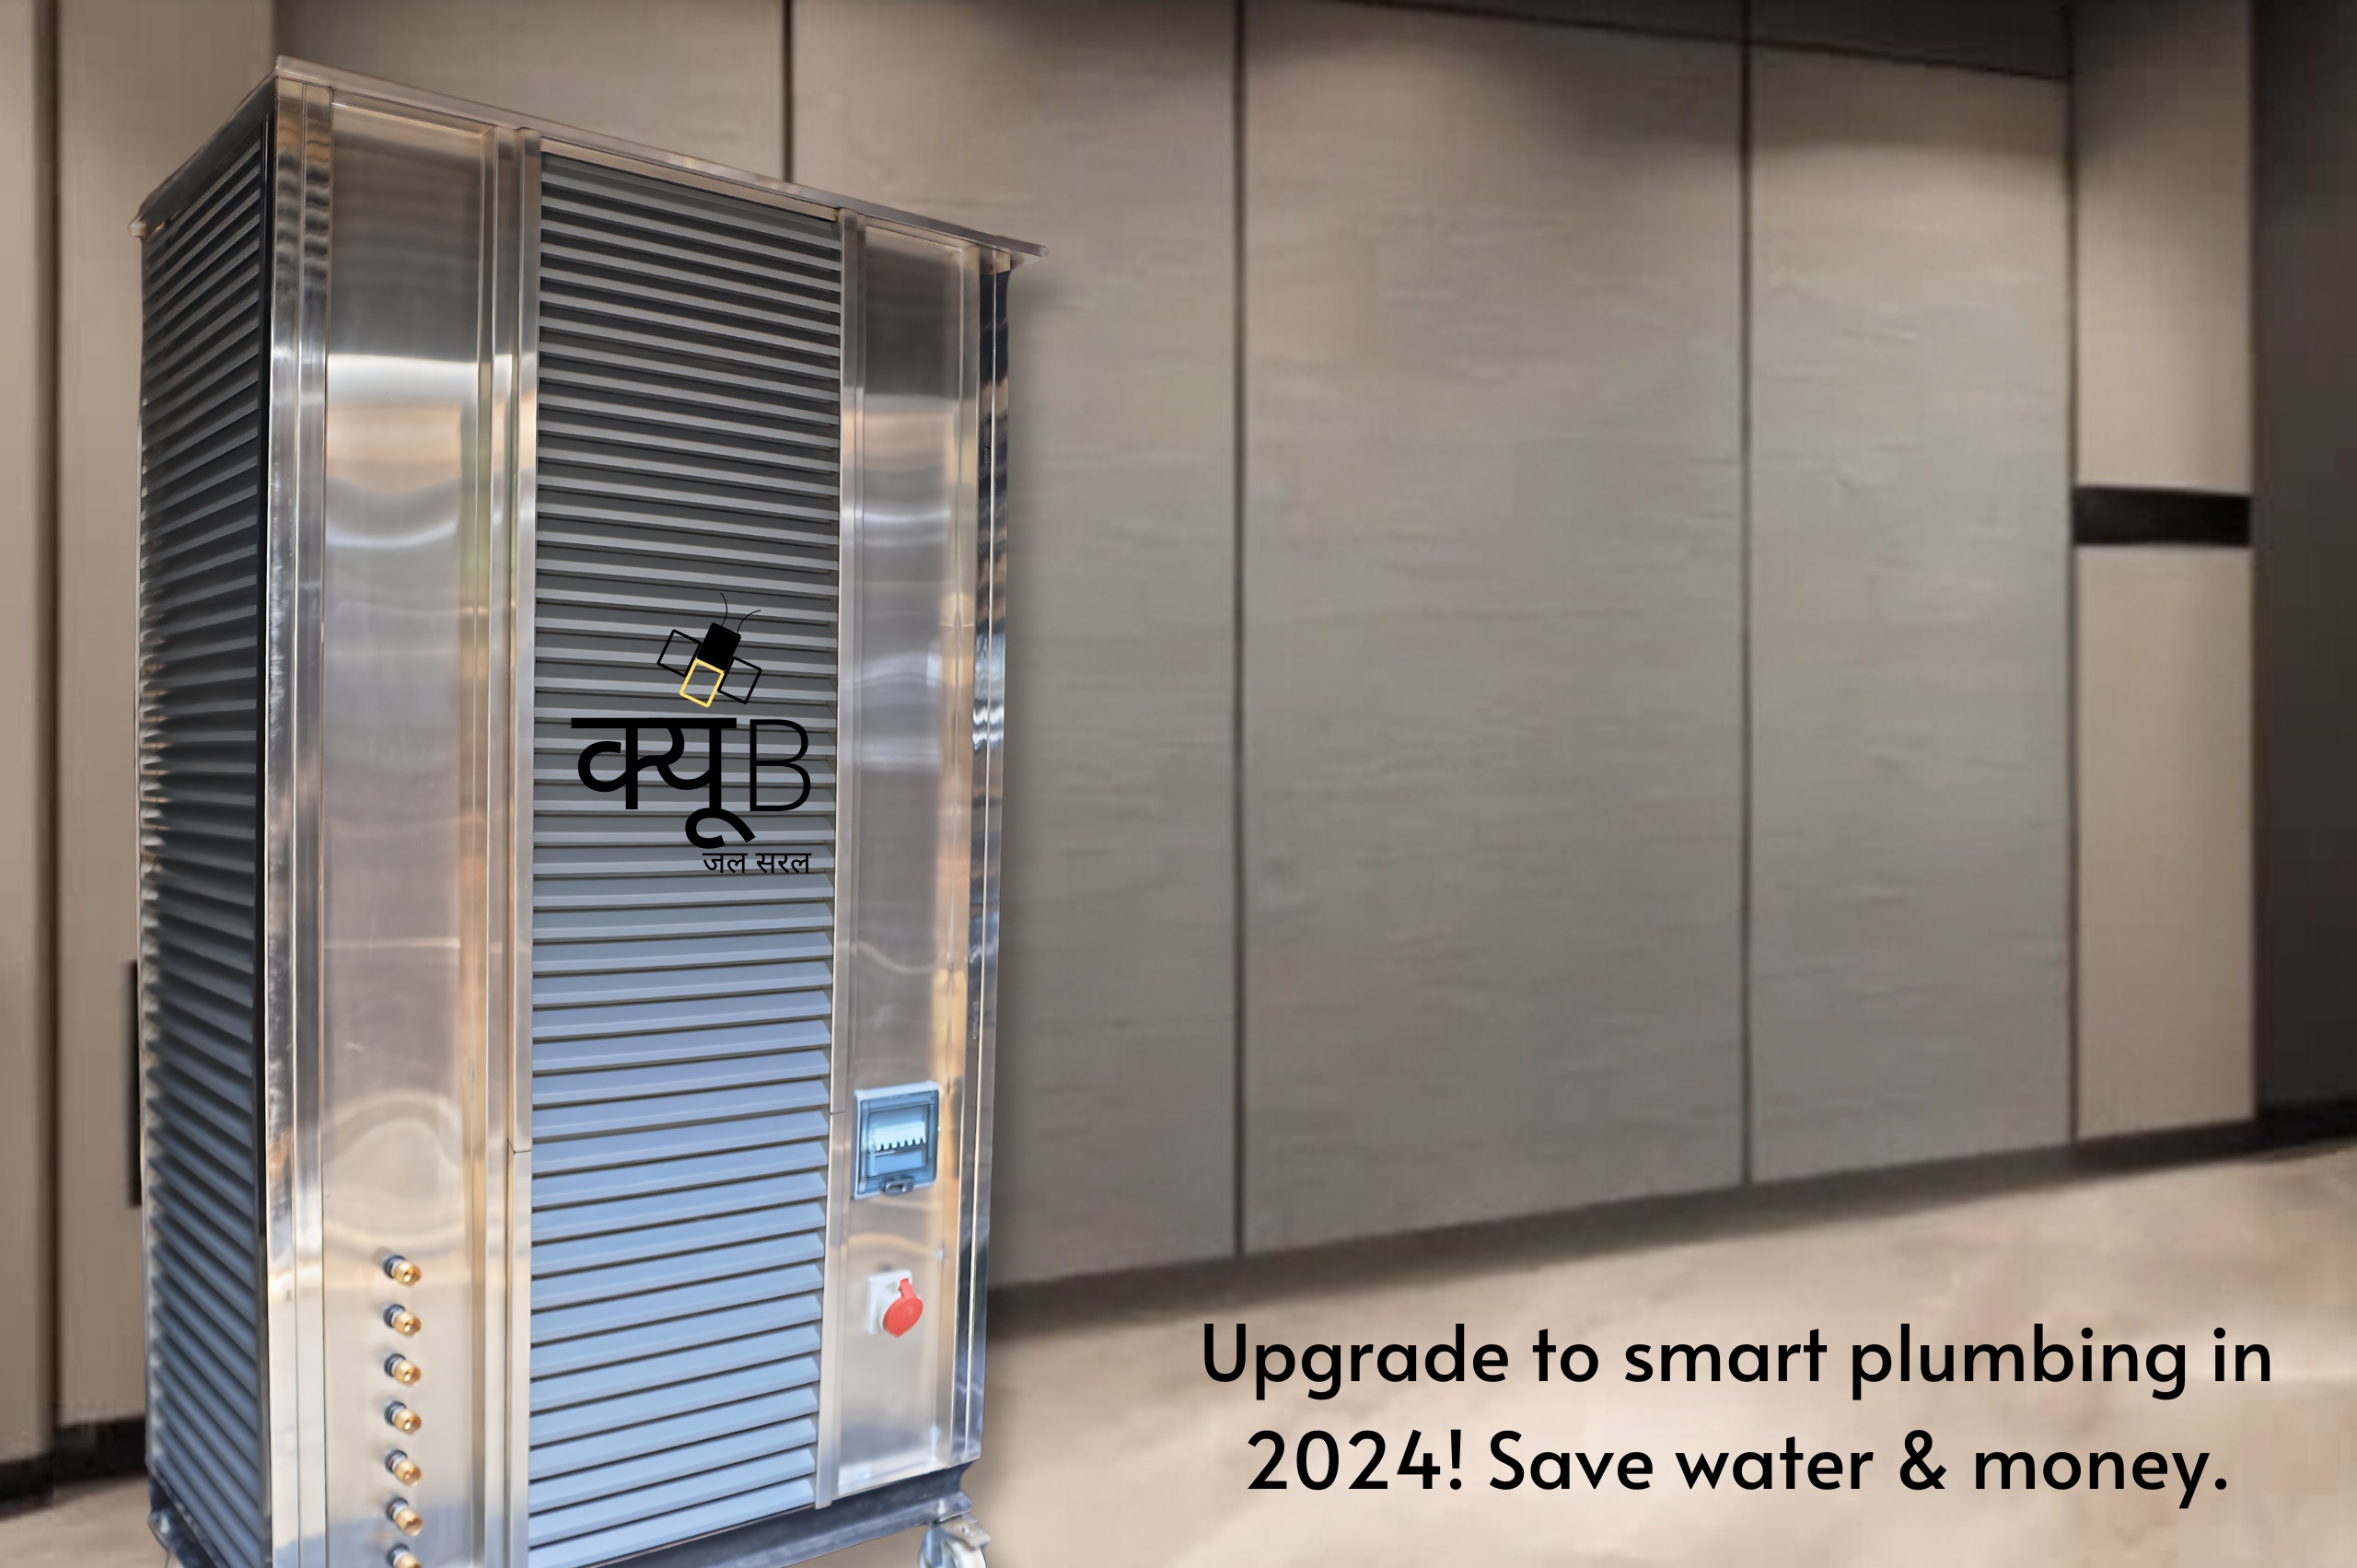 Stop Wasting Water, Save Money, and Upgrade Your Home (or Business) with Smart Plumbing in 2024